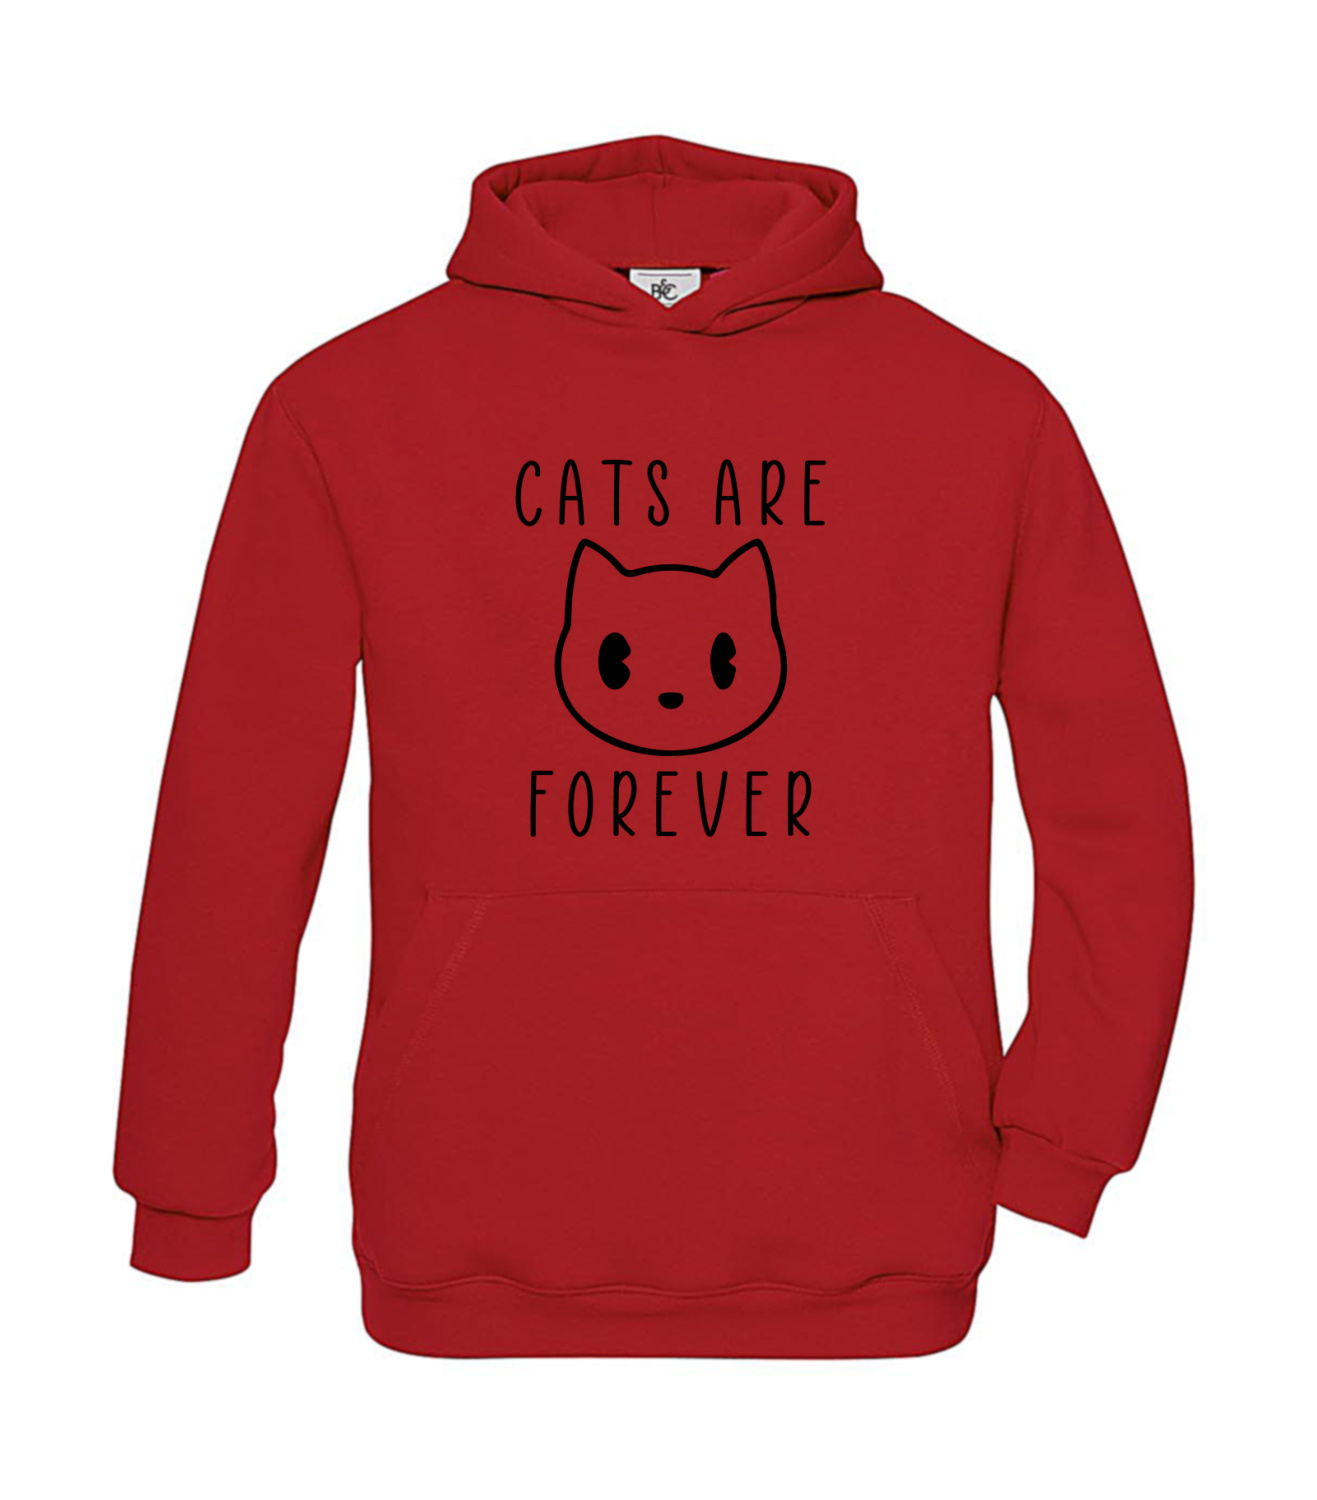 Hoodie Kinder Katzen - Cats are Forever